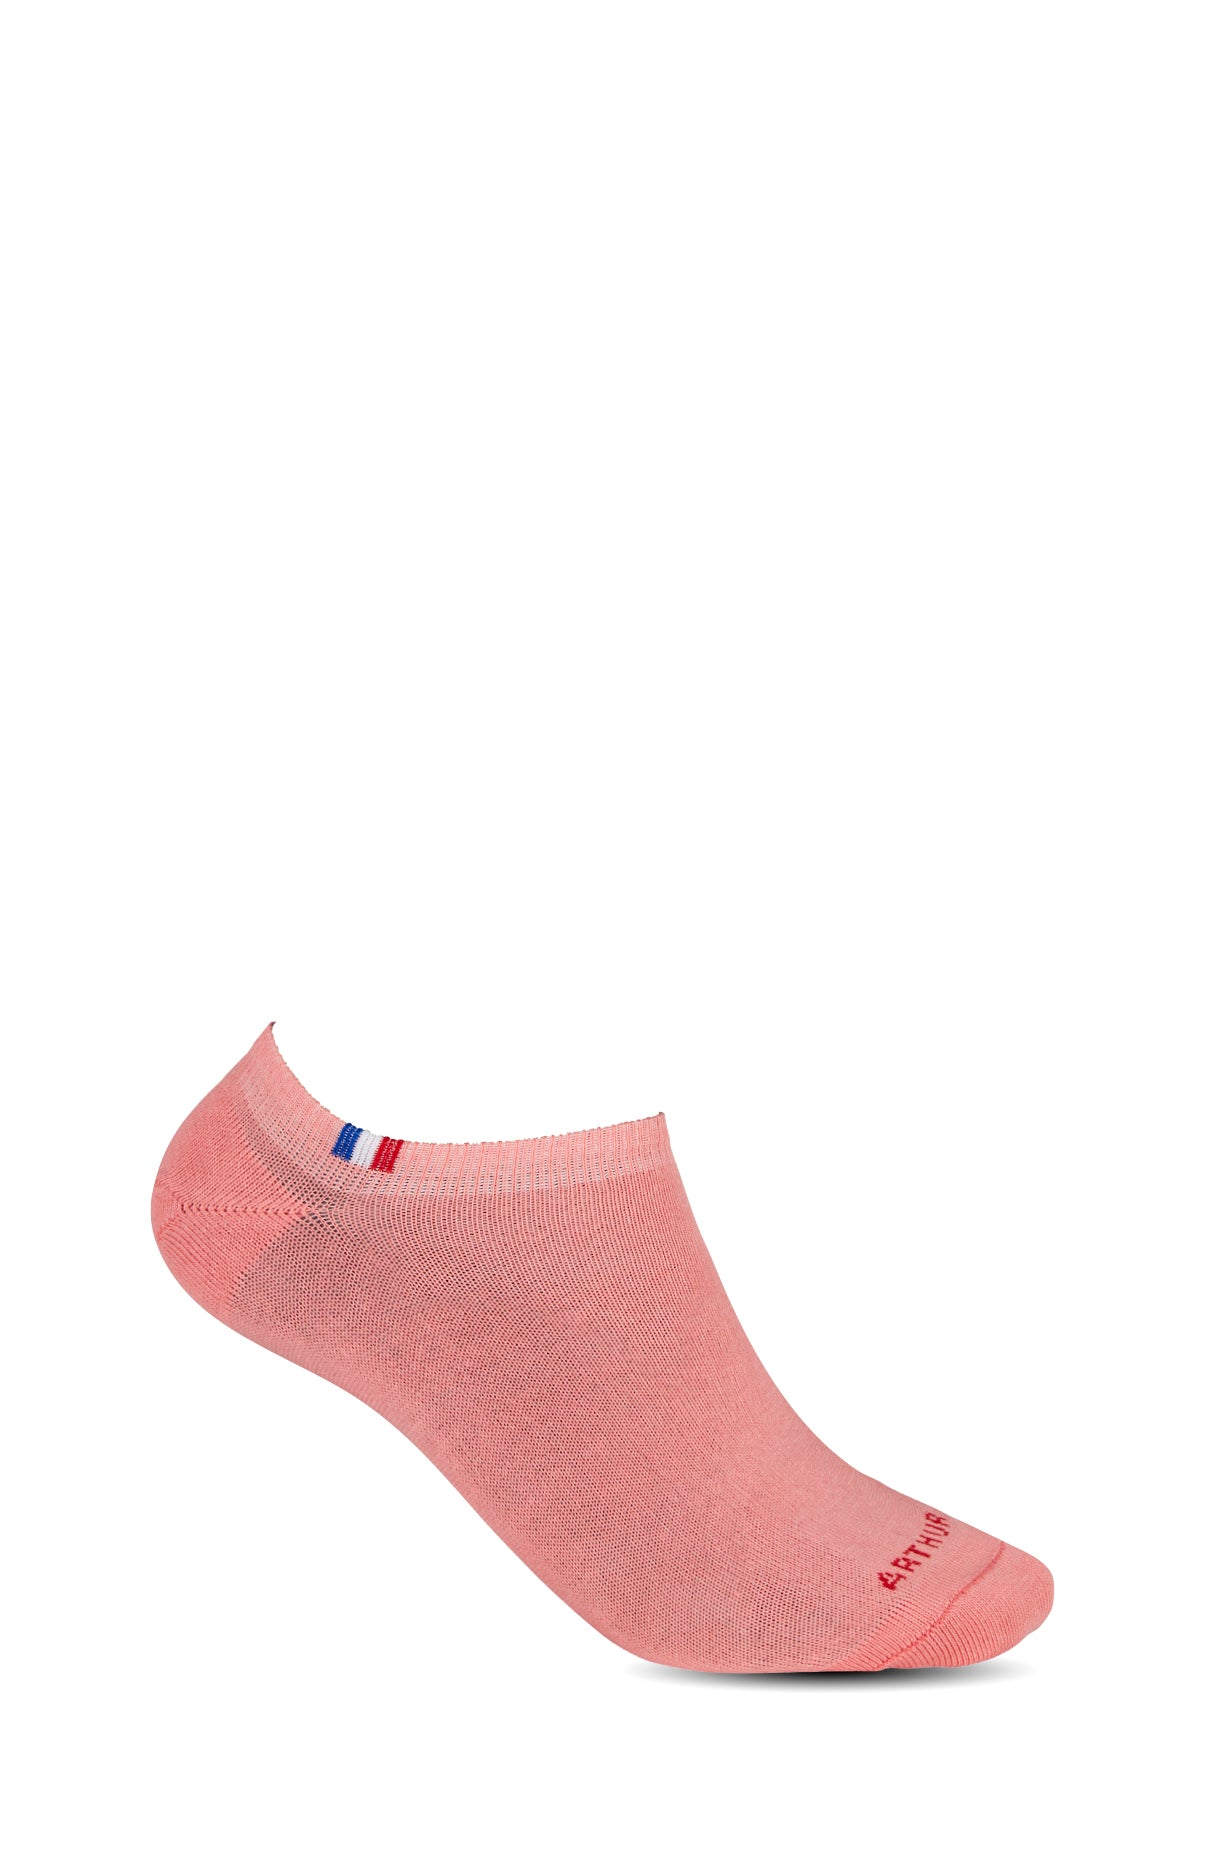 Pack 2 chaussettes invisibles mint 36/40 2